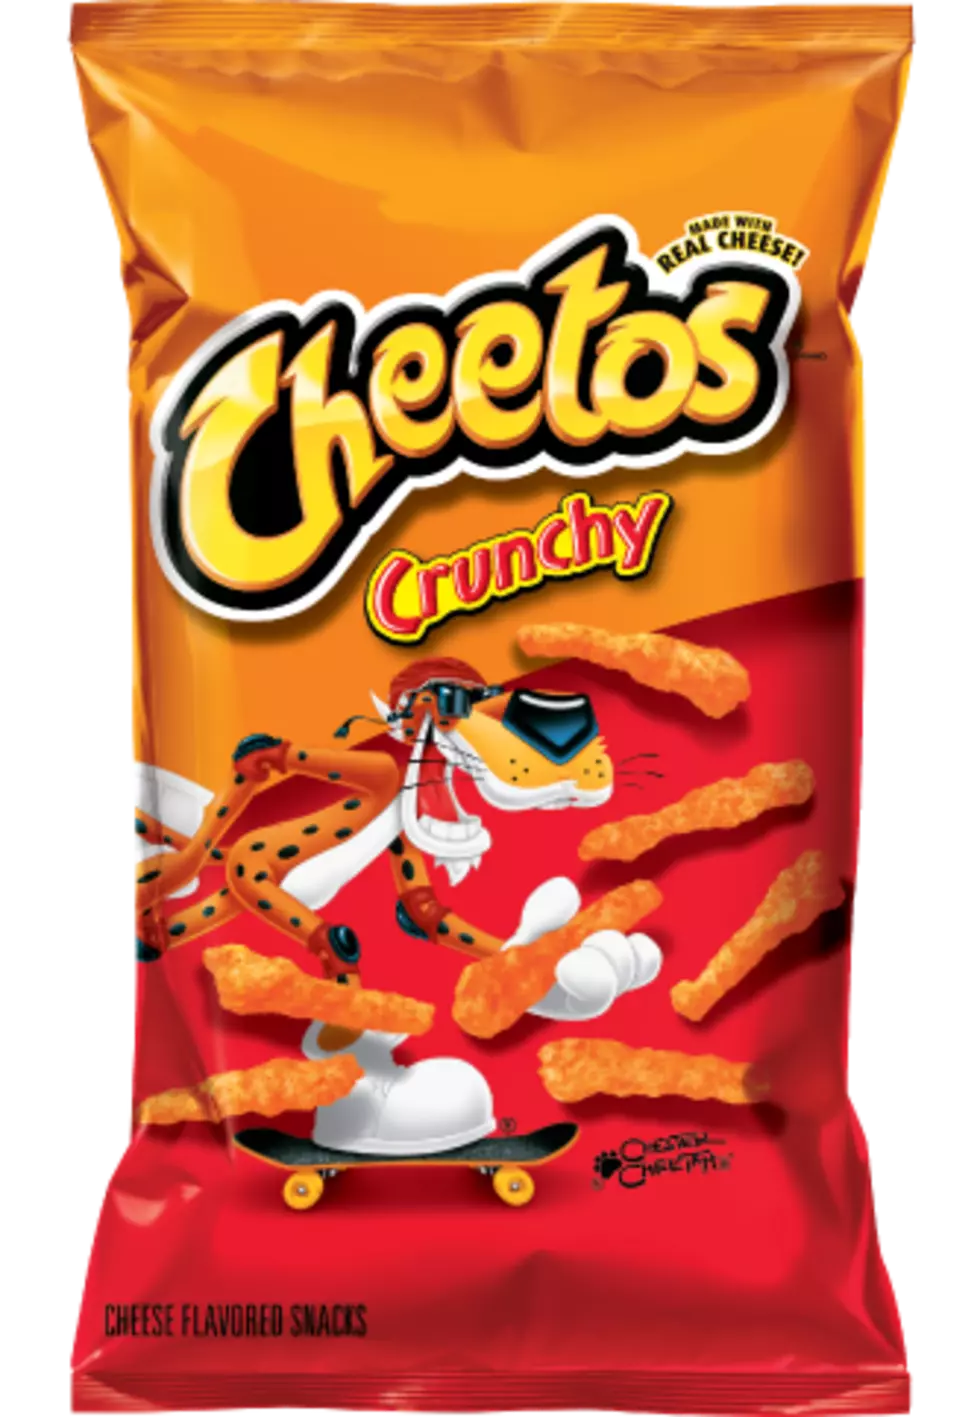 Cheetos Restaurant Coming To New York